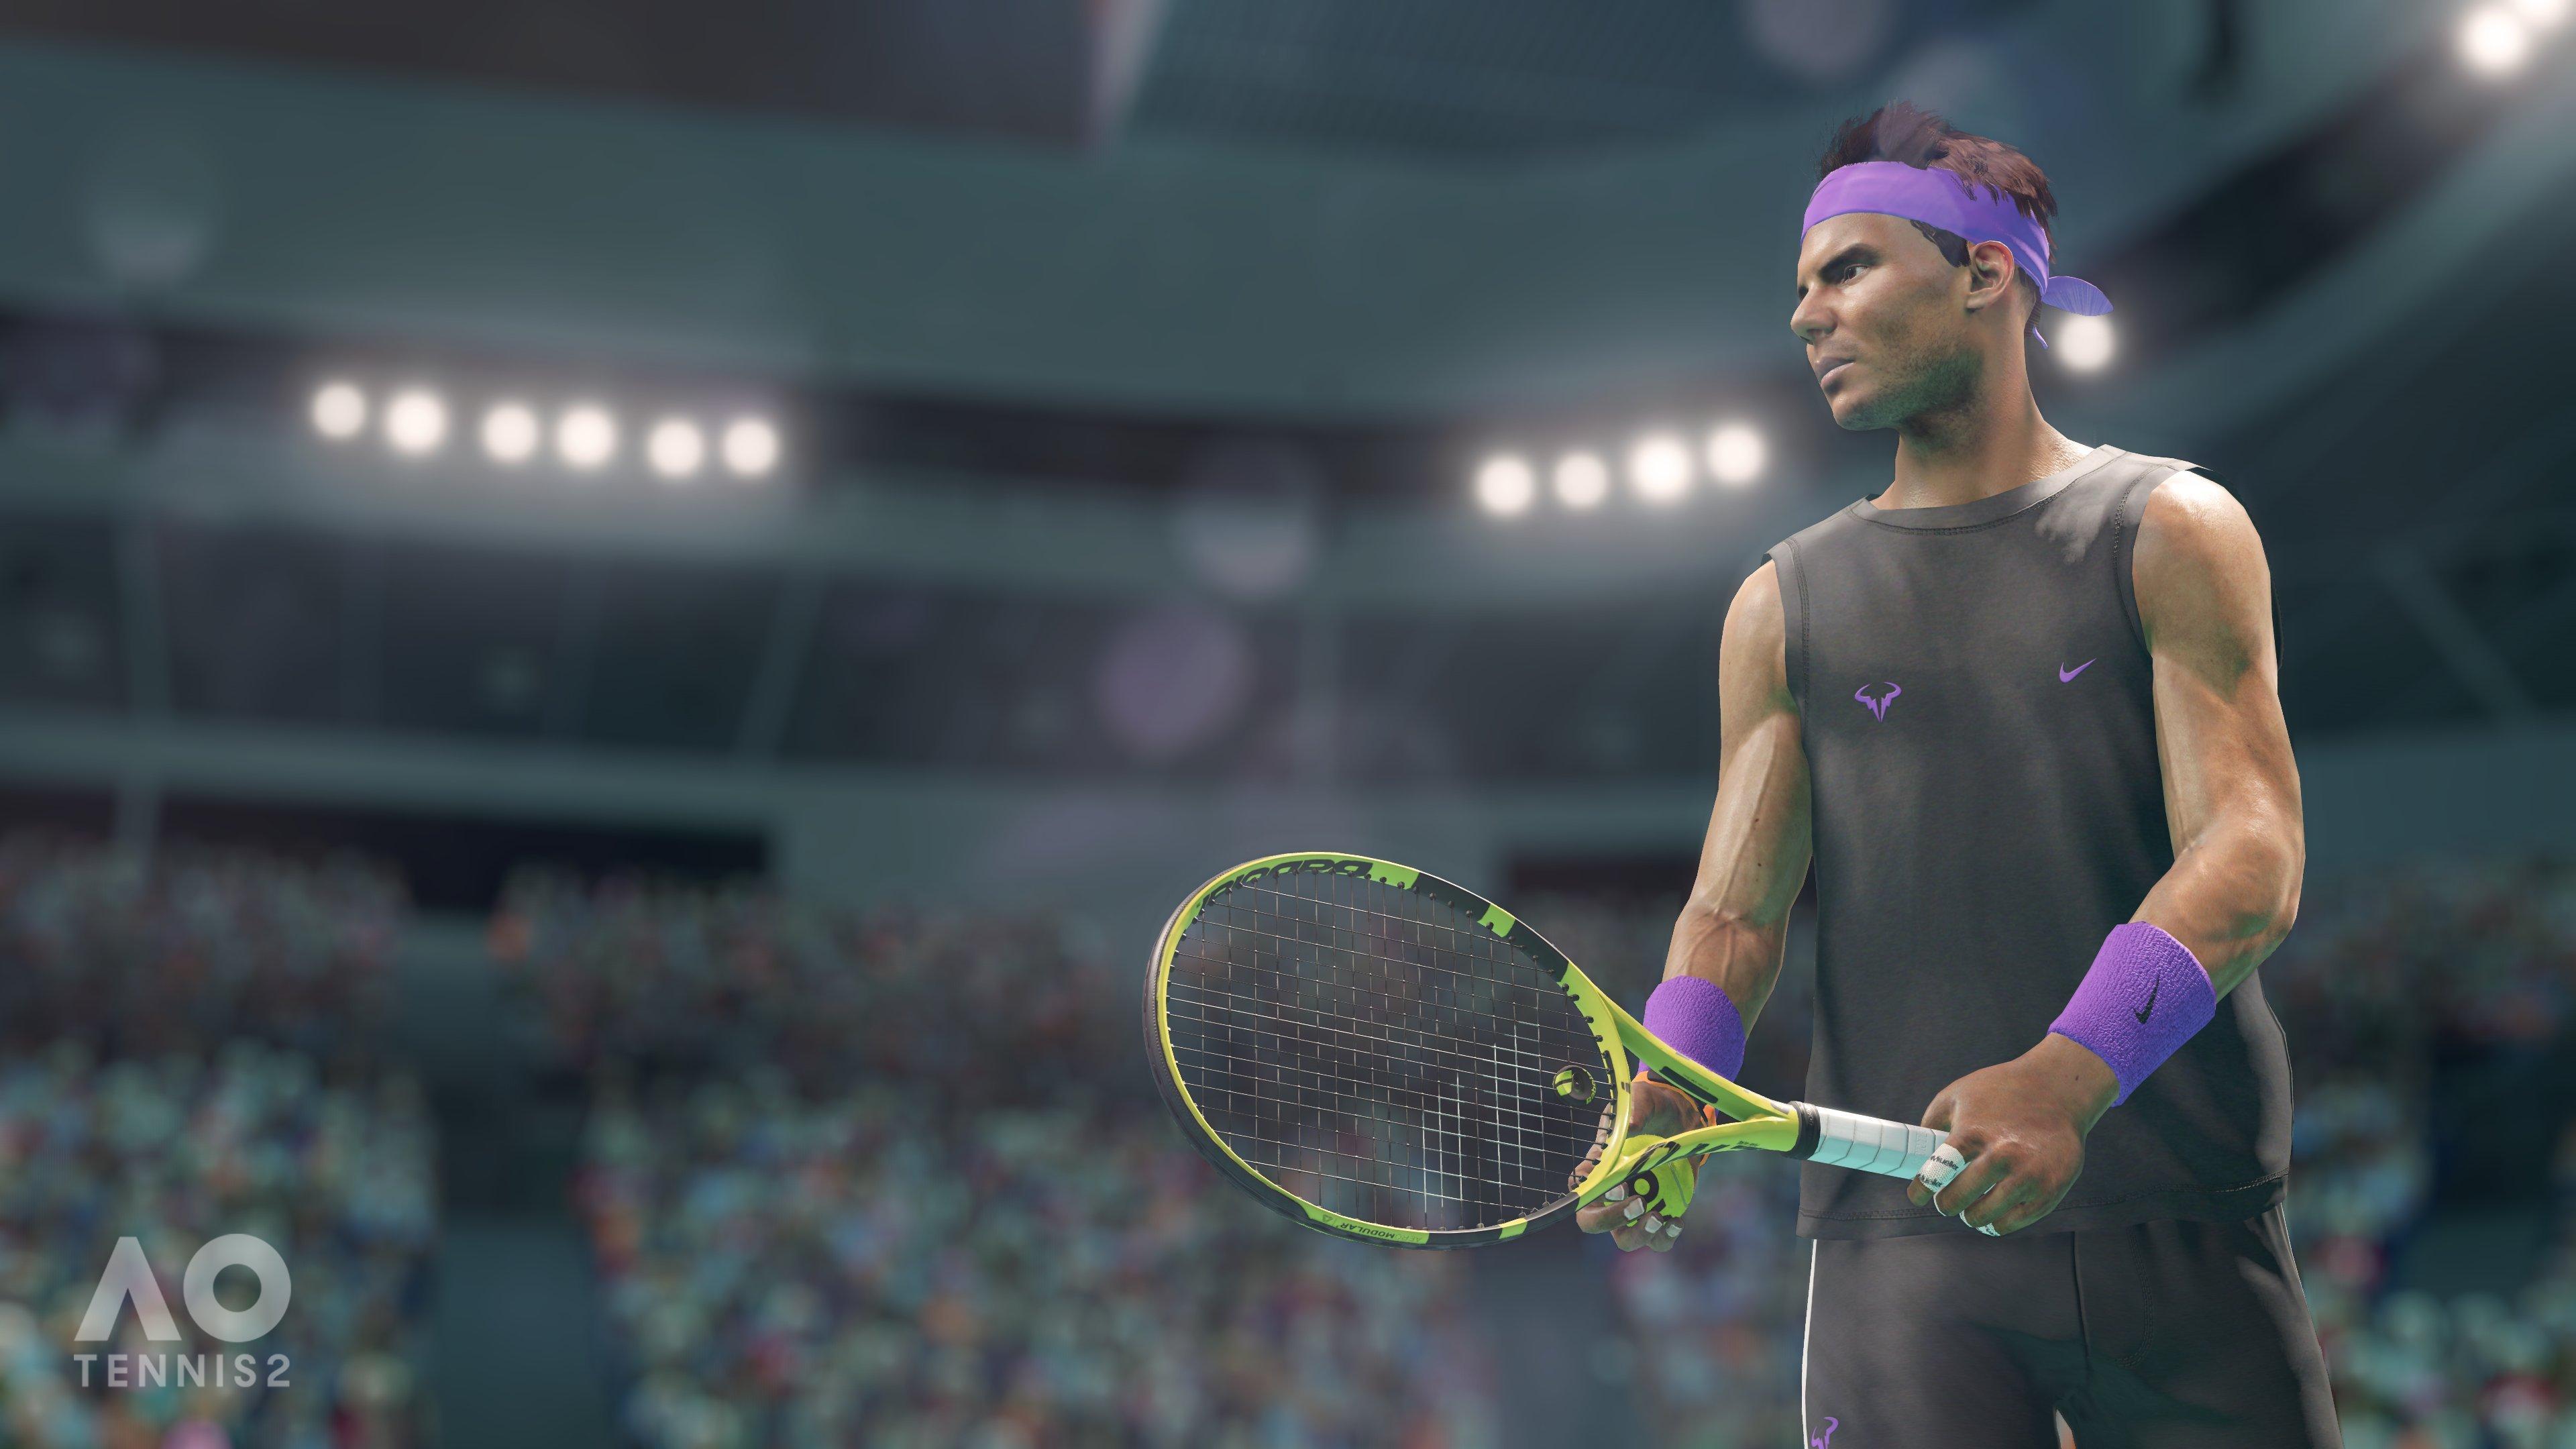 AO Tennis 2 - All Players  List (PS4 HD) [1080p60FPS] 